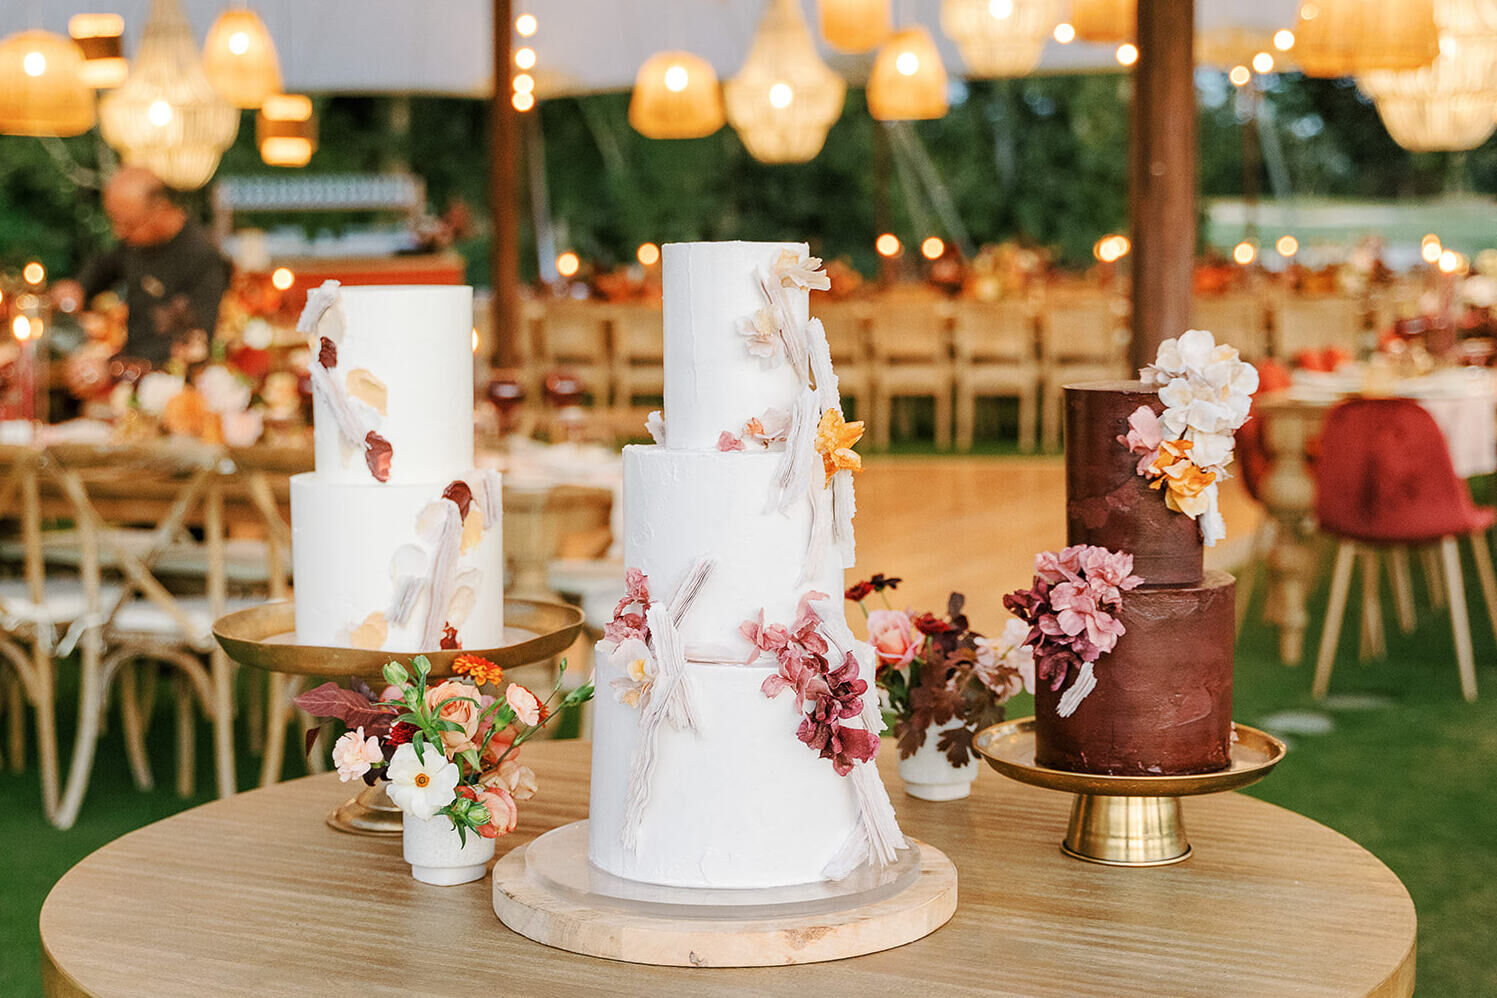 A trio of wedding cakes—two white and one a chocolate brown—boasting complementary decoration.